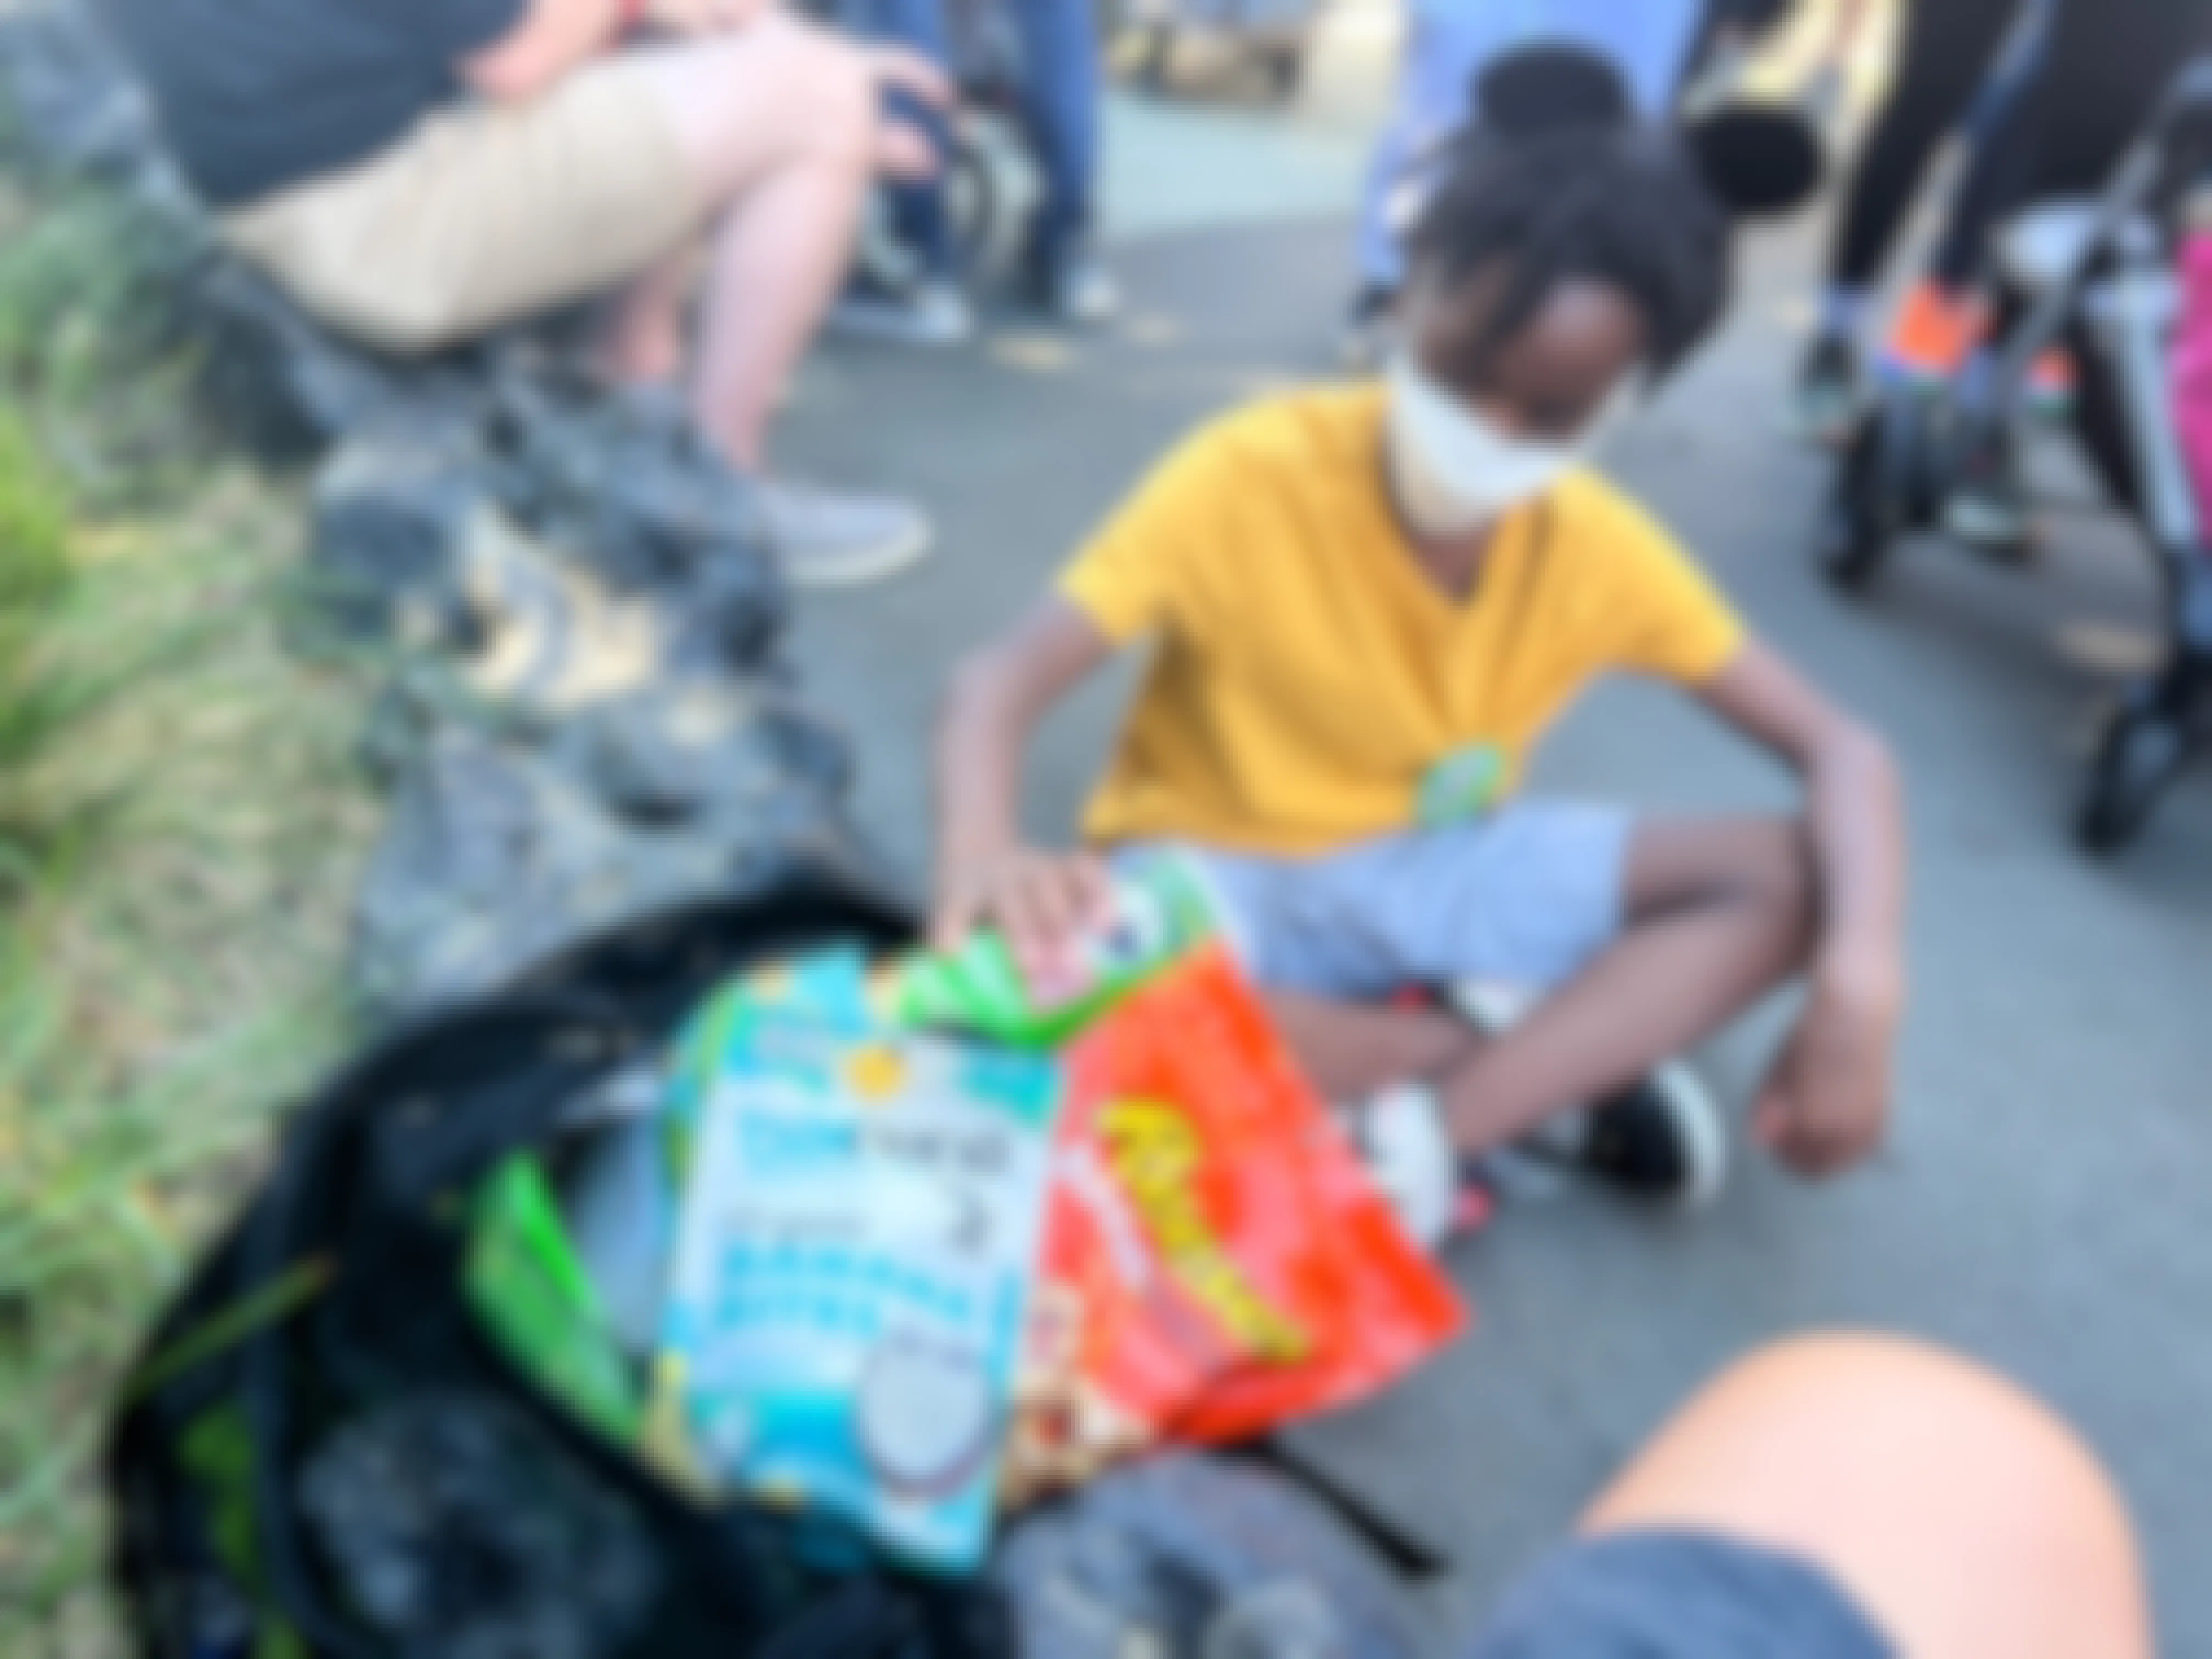 A kid with Mickey Mouse ears pulls snacks from a bag at Disney World